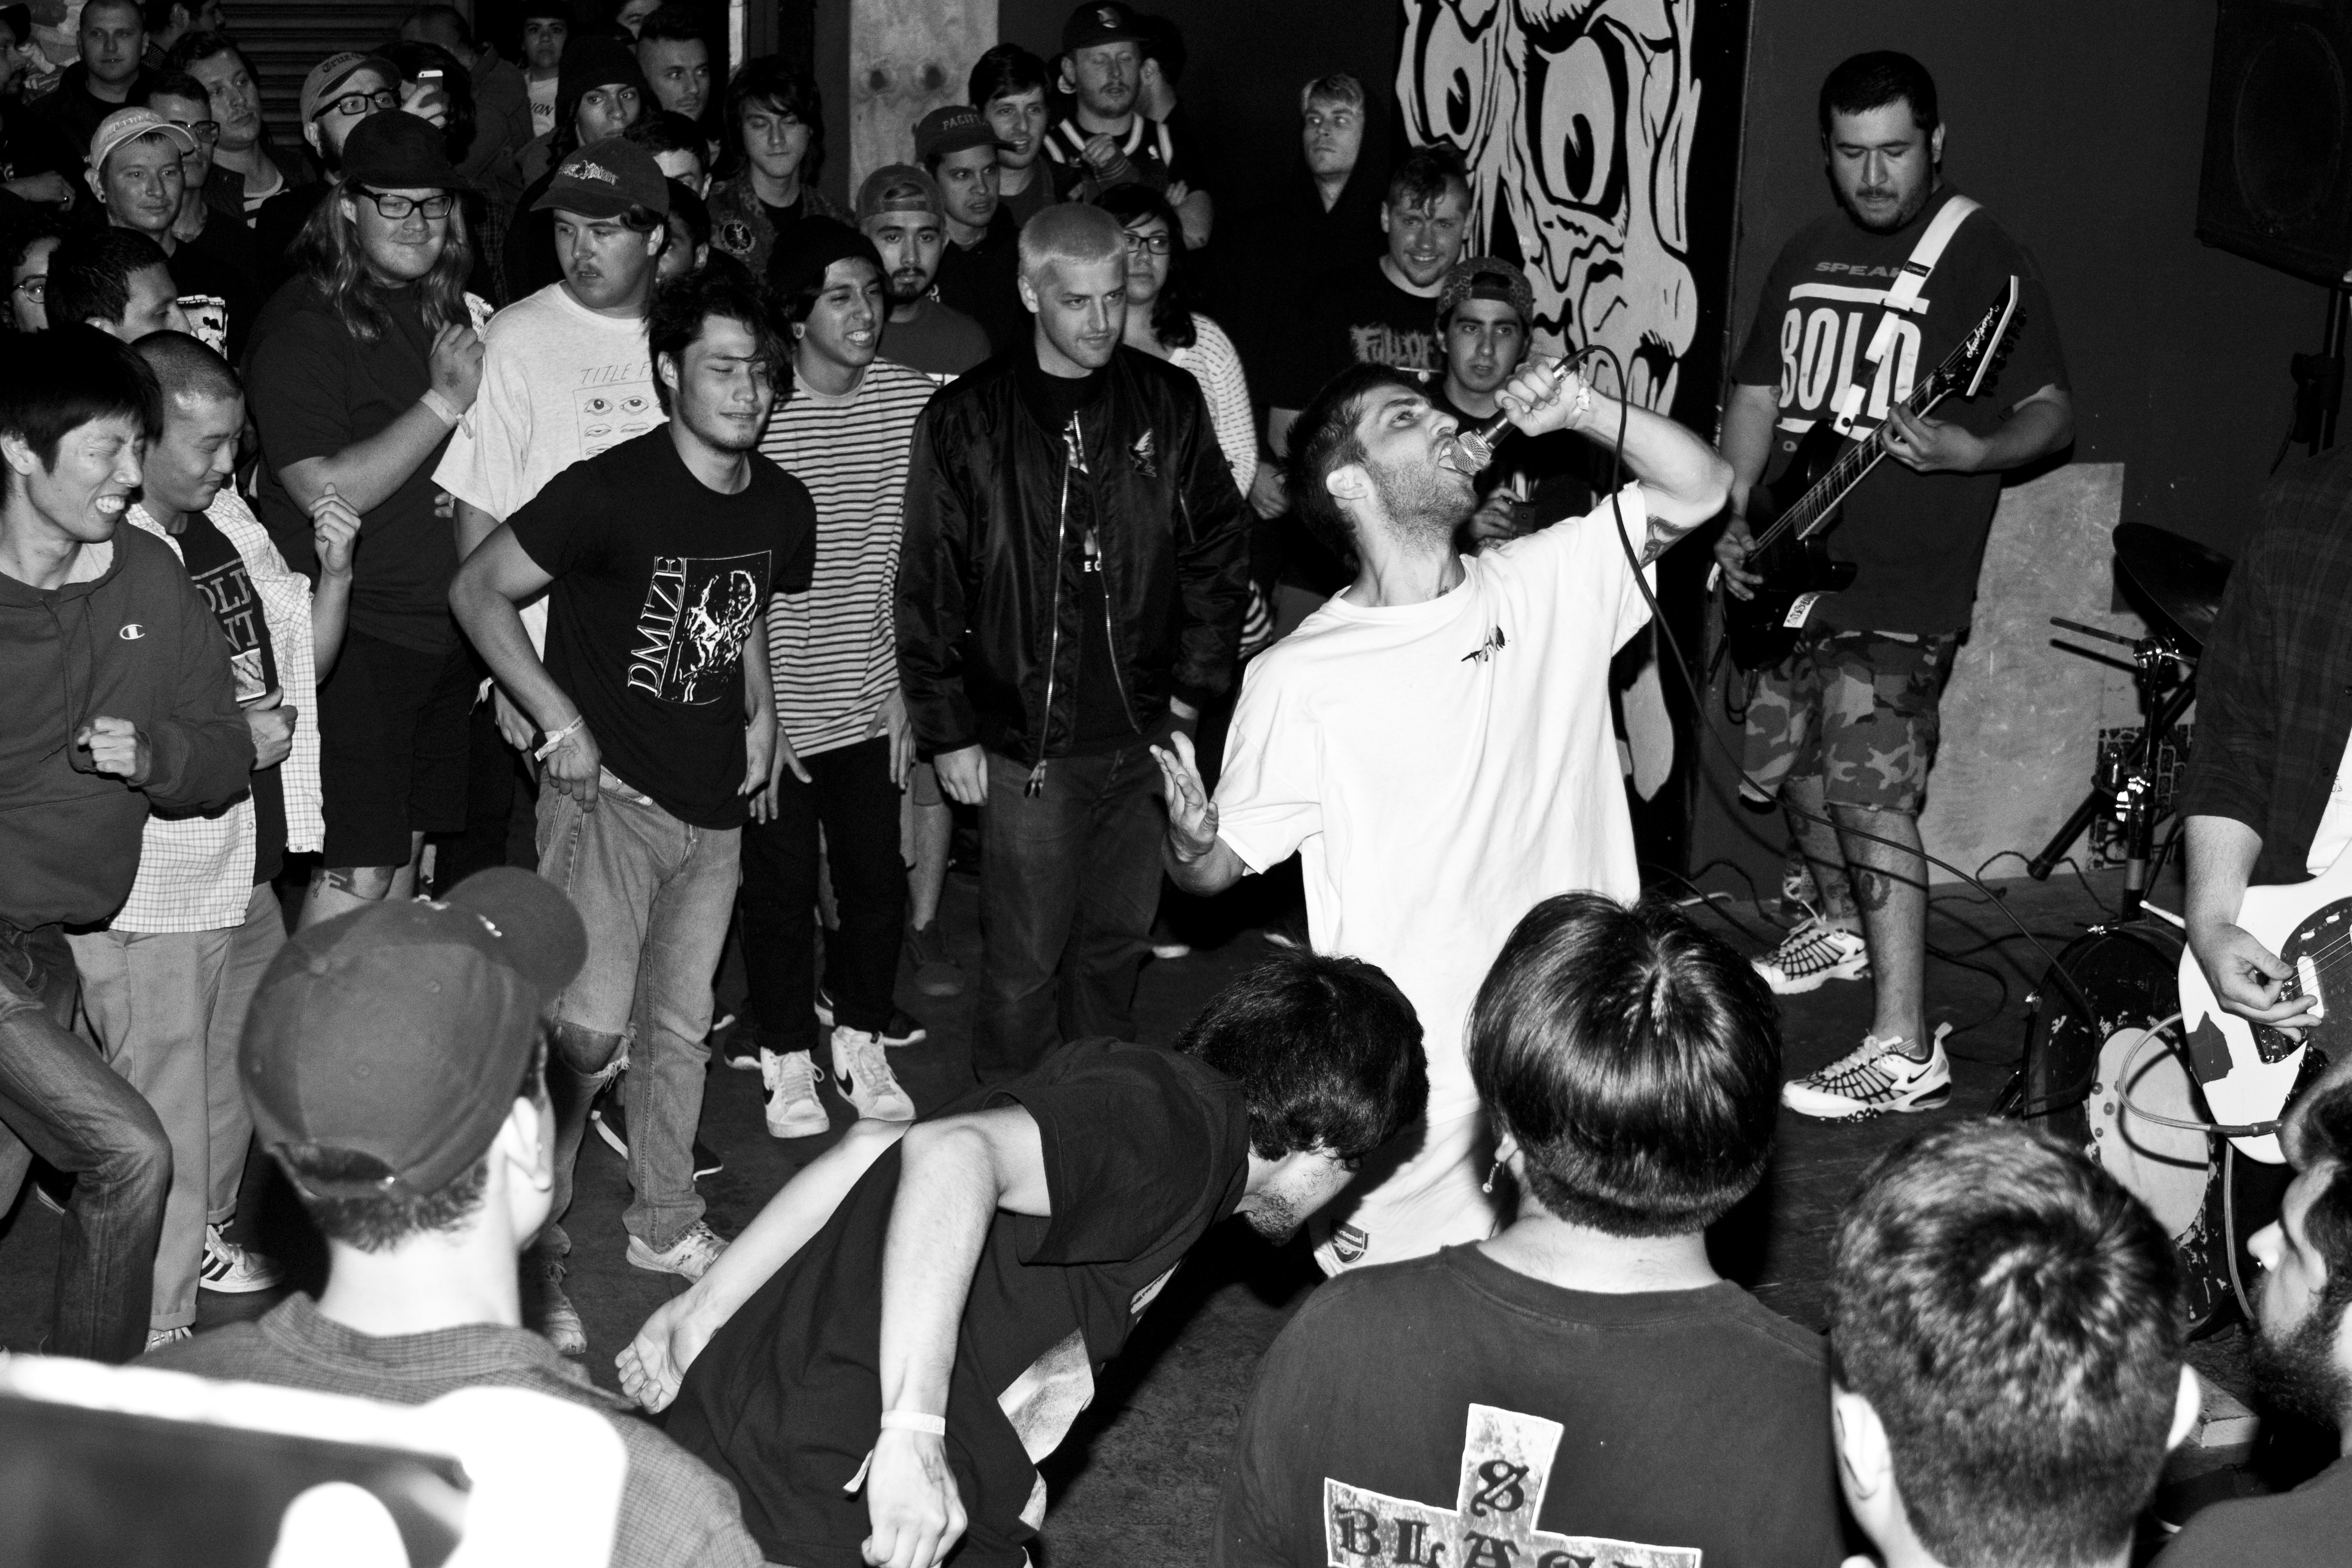 Fury at one of the official after shows. Photo by Wayne Ballard